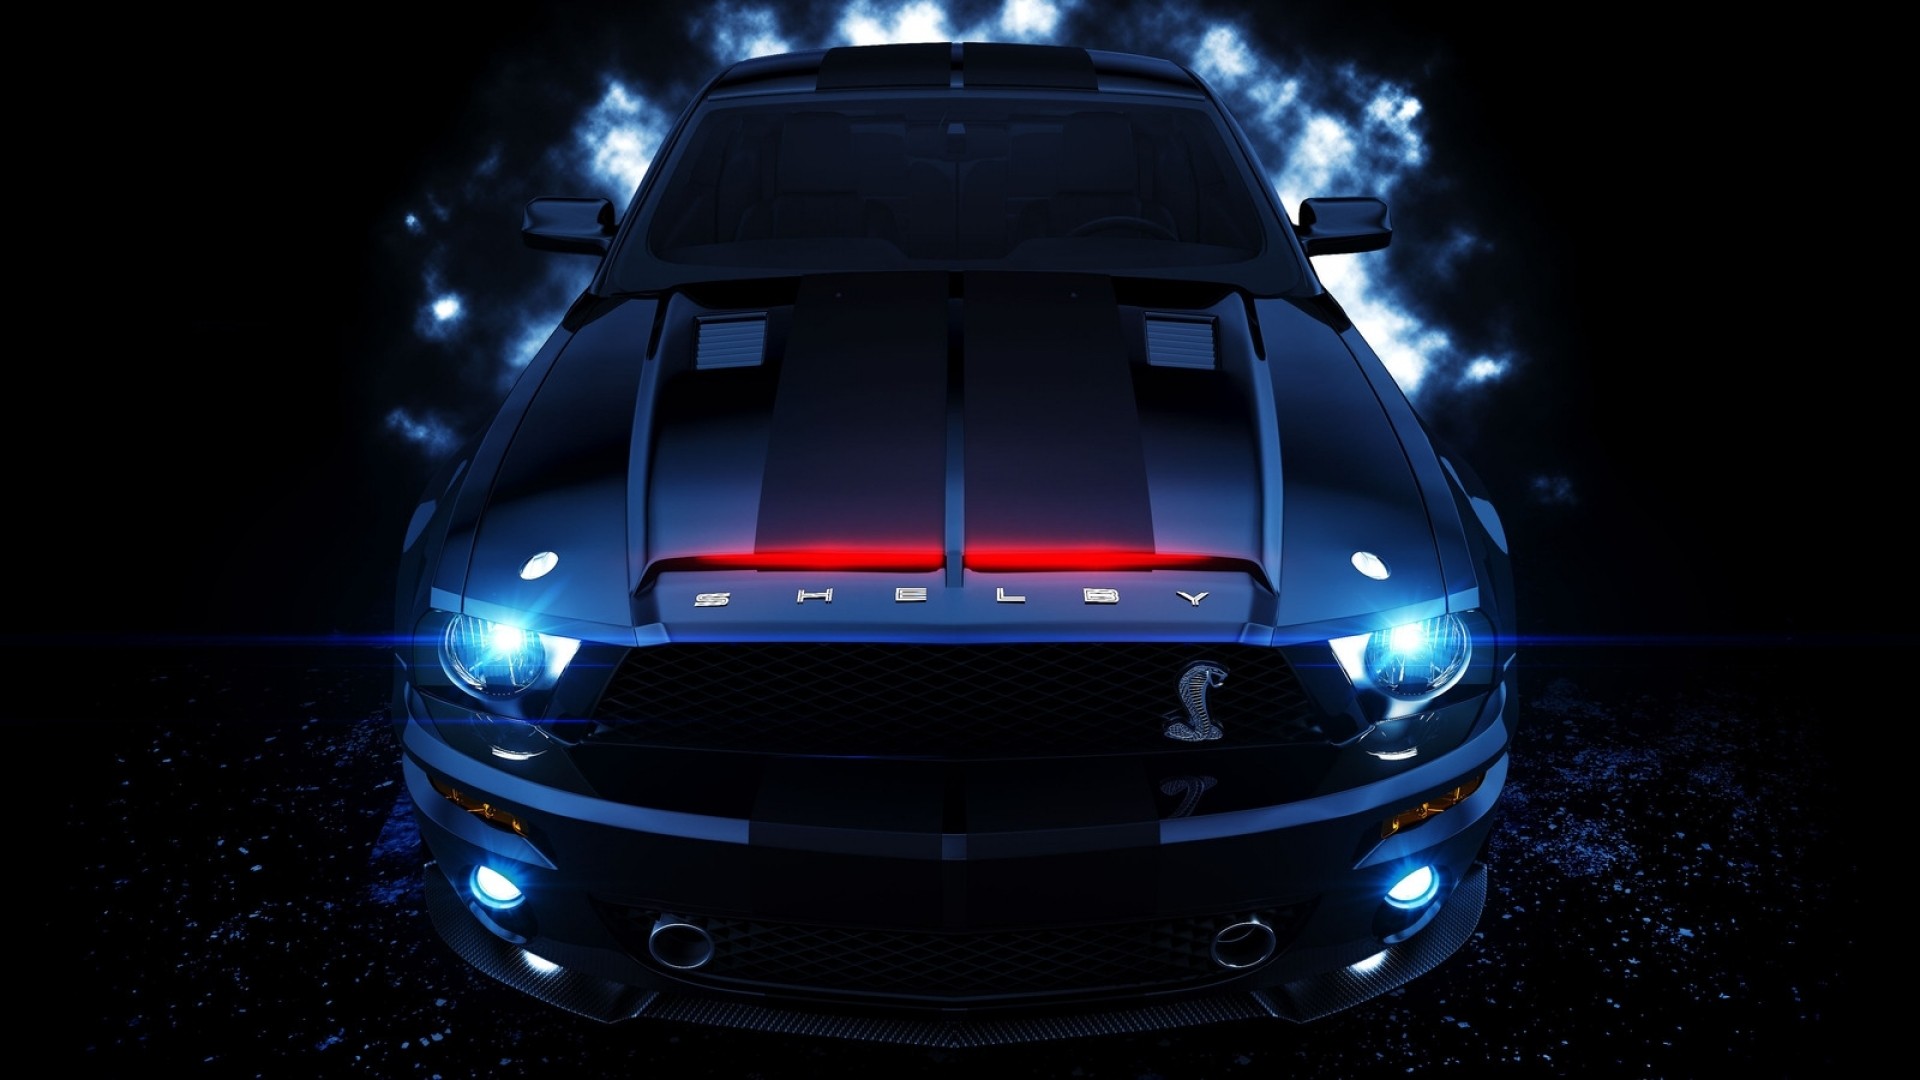 General 1920x1080 car vehicle Ford Shelby Ford Mustang Ford Mustang S-197 American cars muscle cars Ford Mustang Shelby